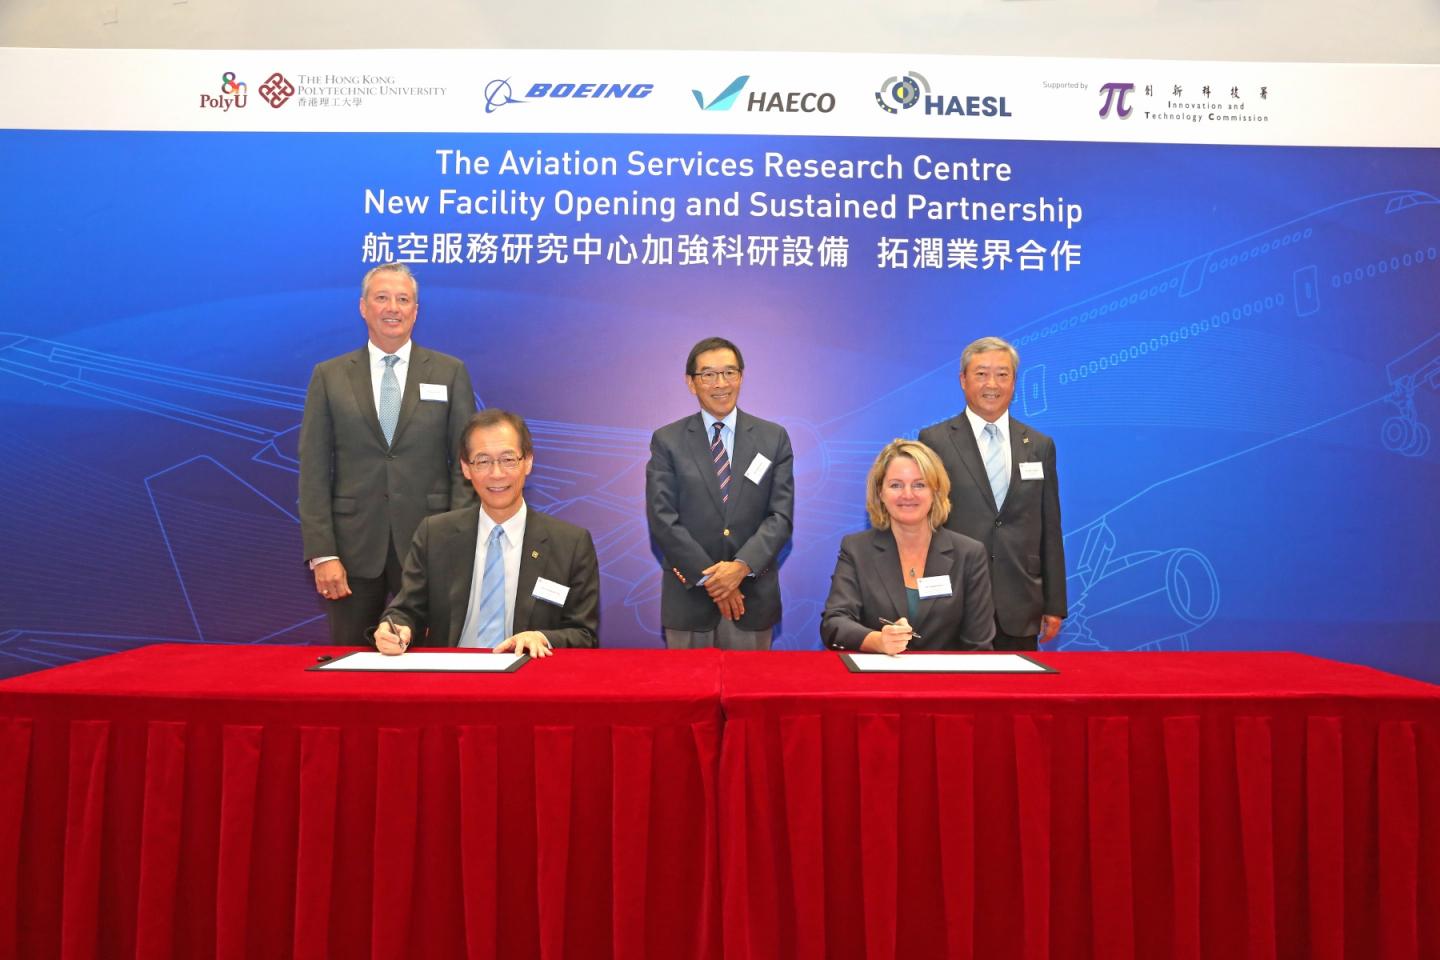 PolyU and Boeing Signed to Renew a Partnership for Another Five Years